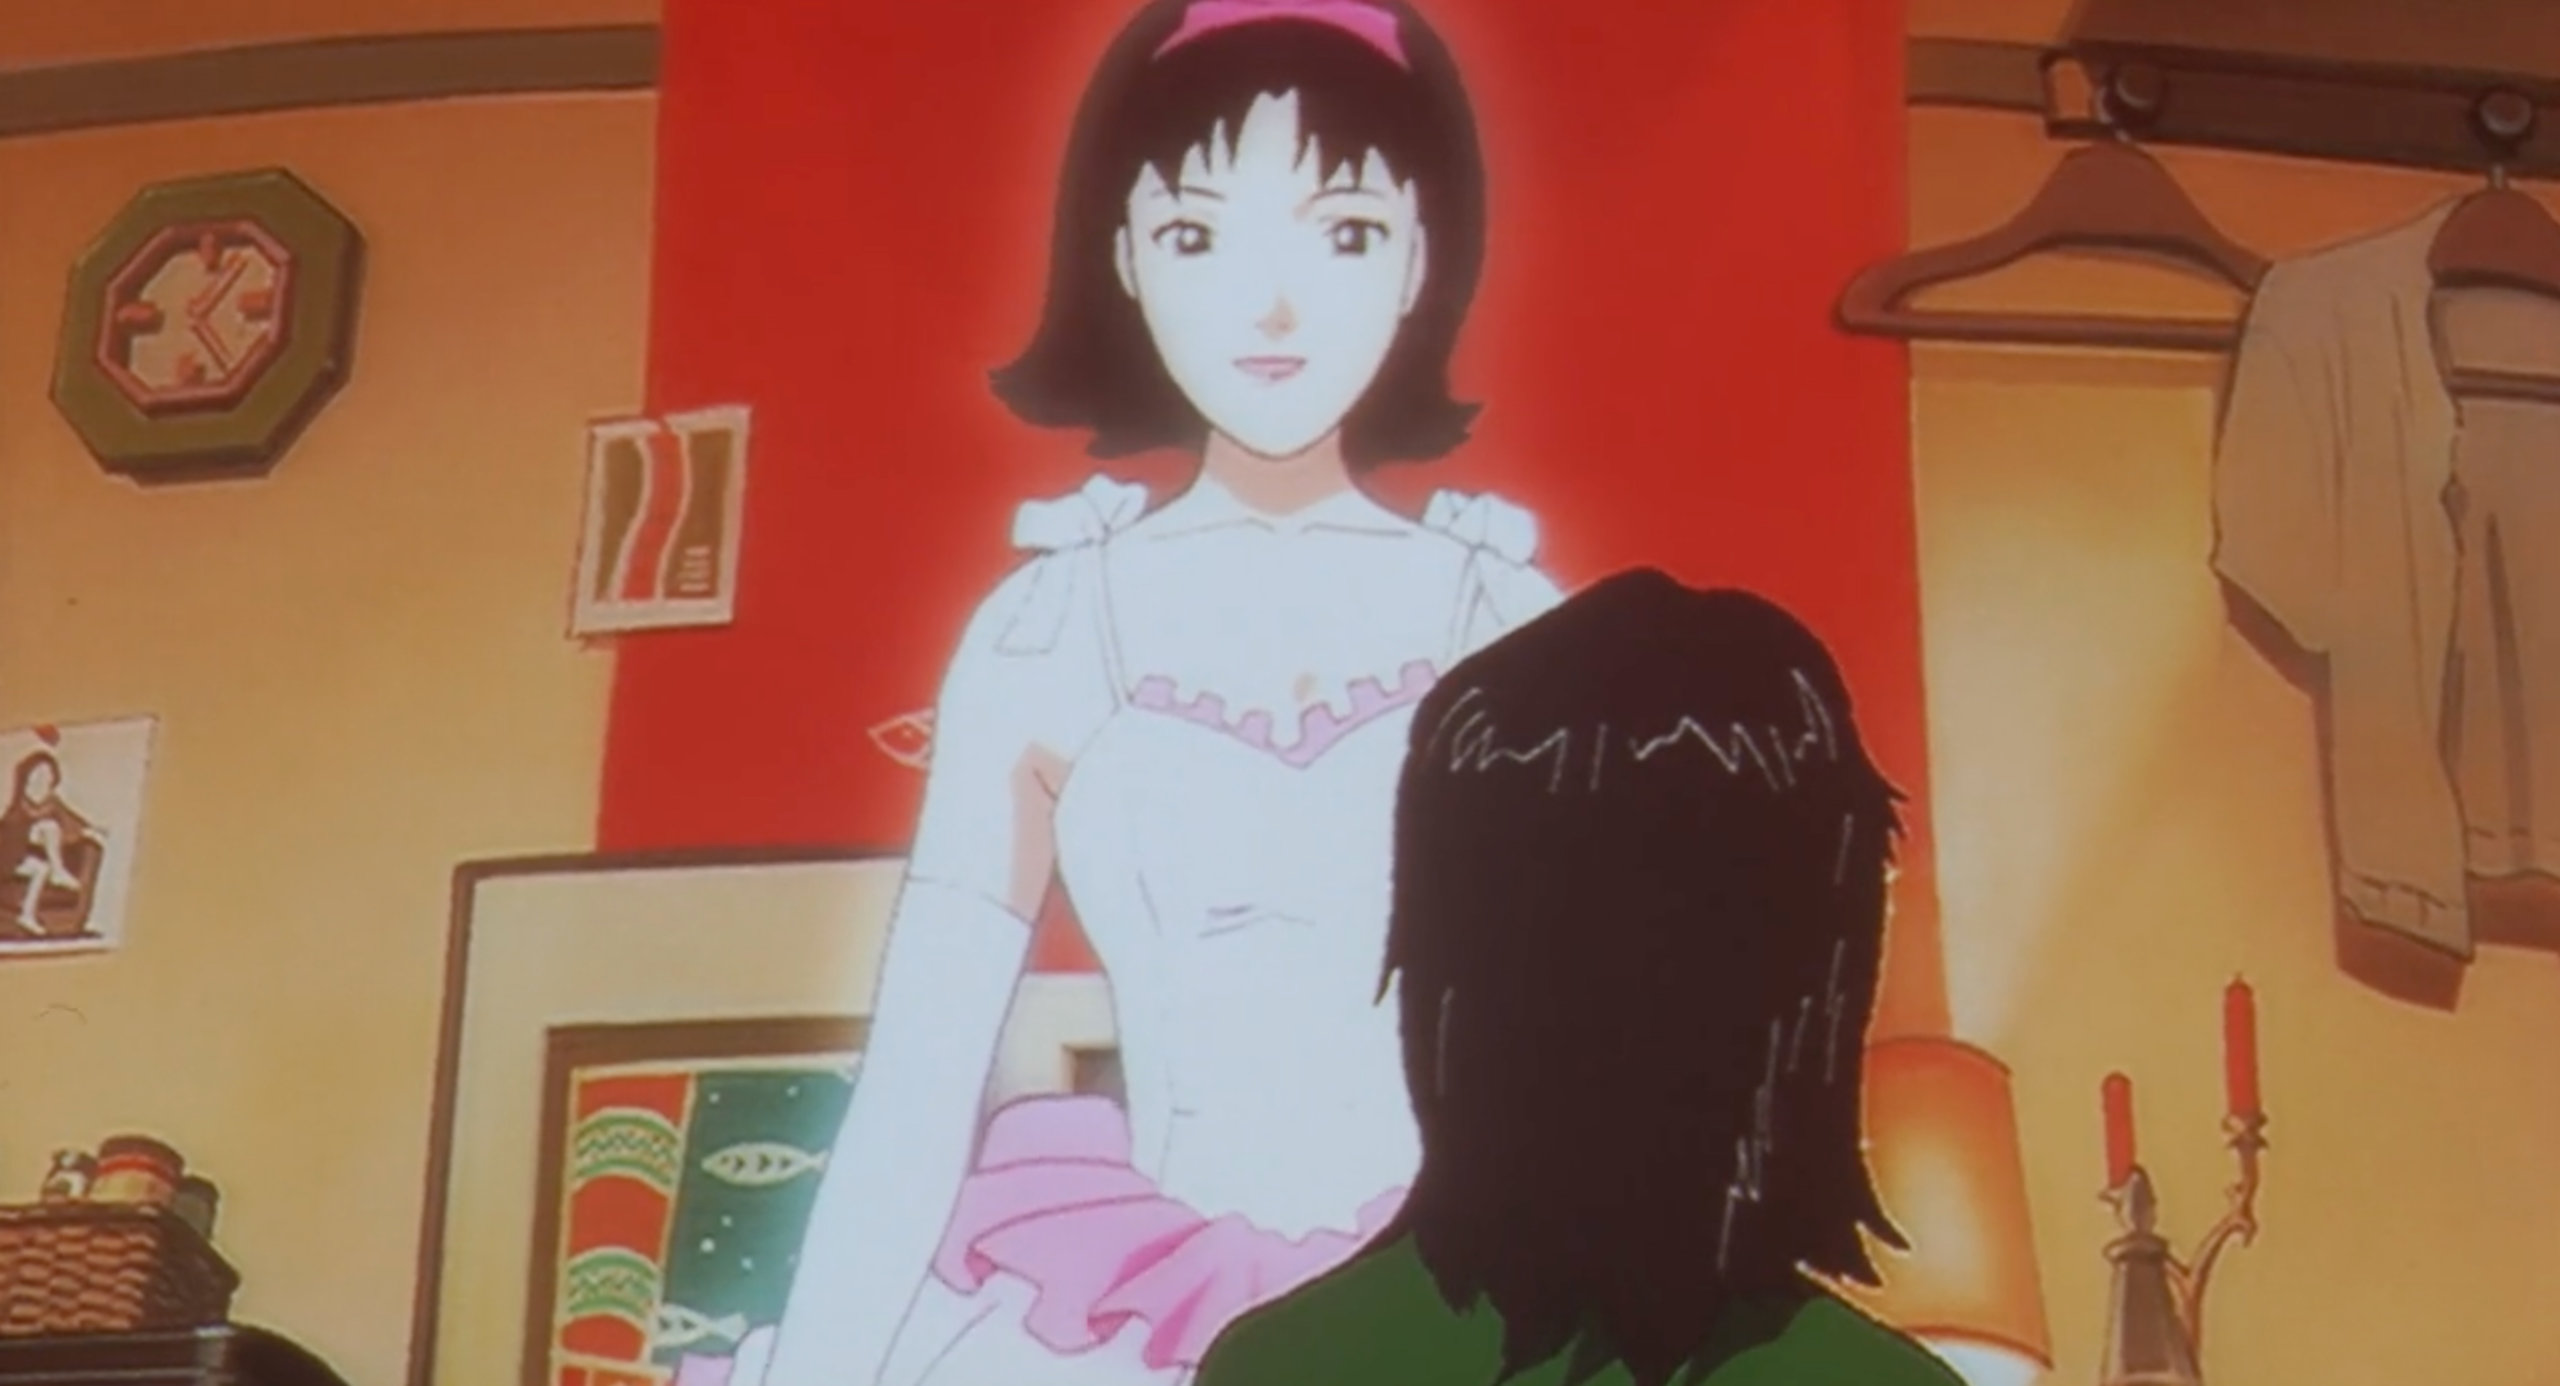 Idol Mima appears out of Mima's computer in Perfect Blue